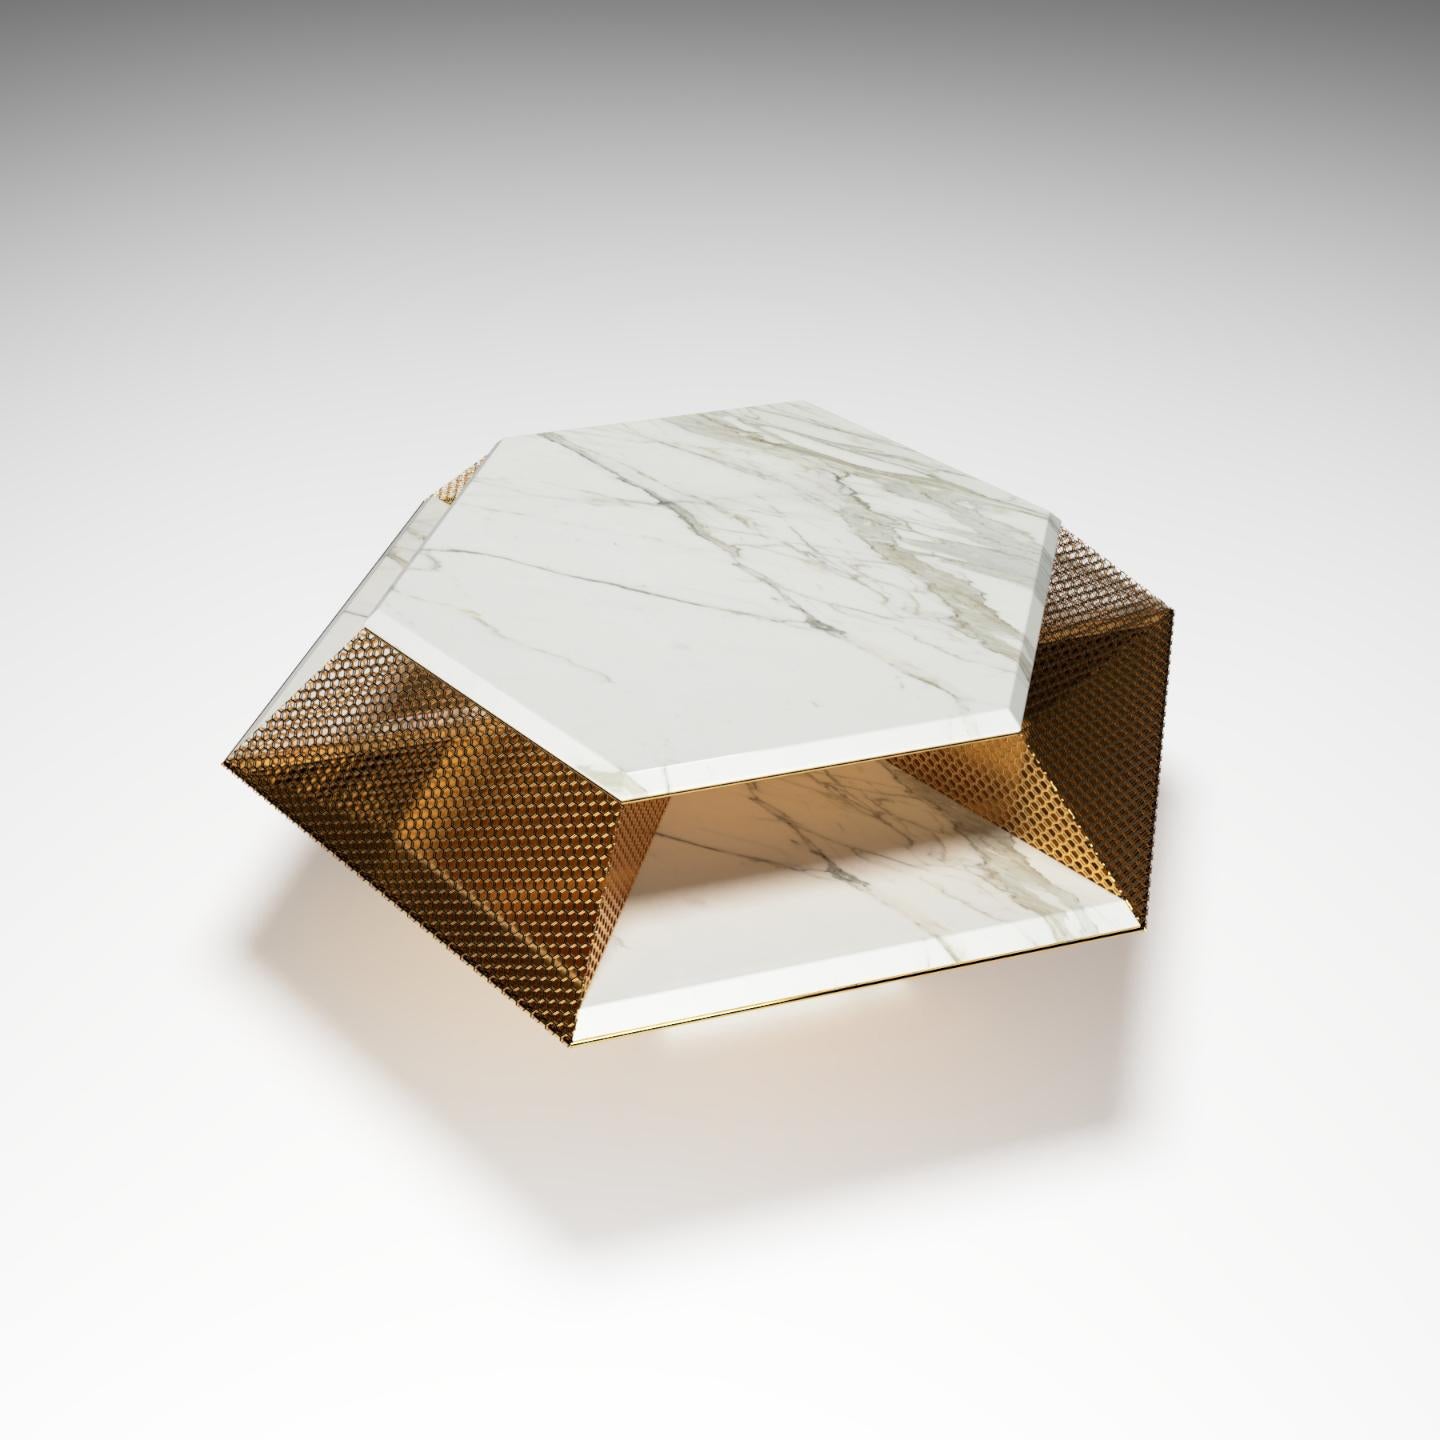 Hand-Crafted Rough Diamond Center Table, 1 of 1 by Grzegorz Majka For Sale